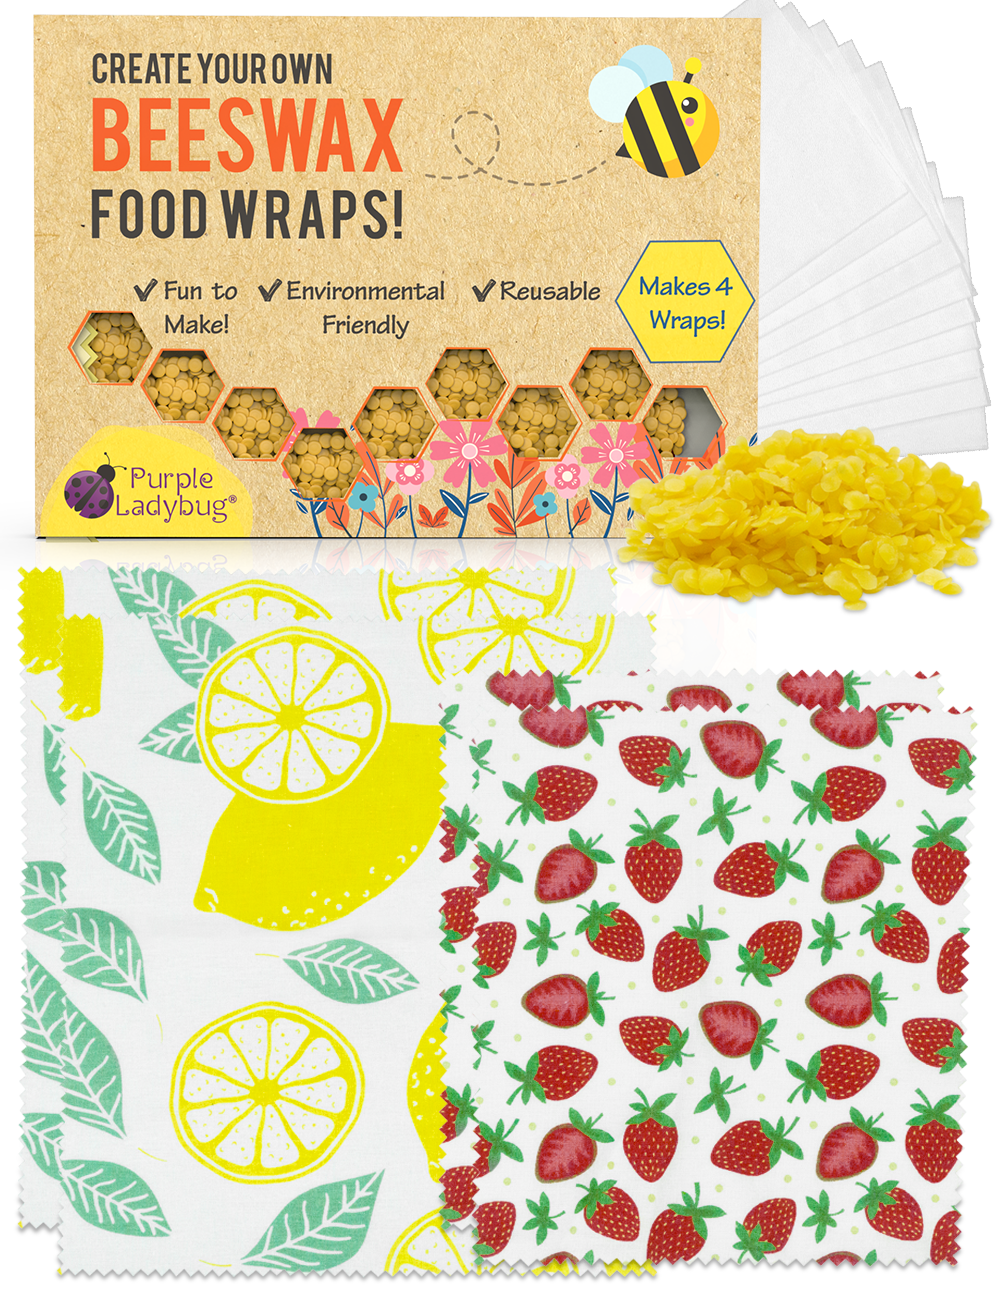 Create Your Own Beeswax Food Wraps